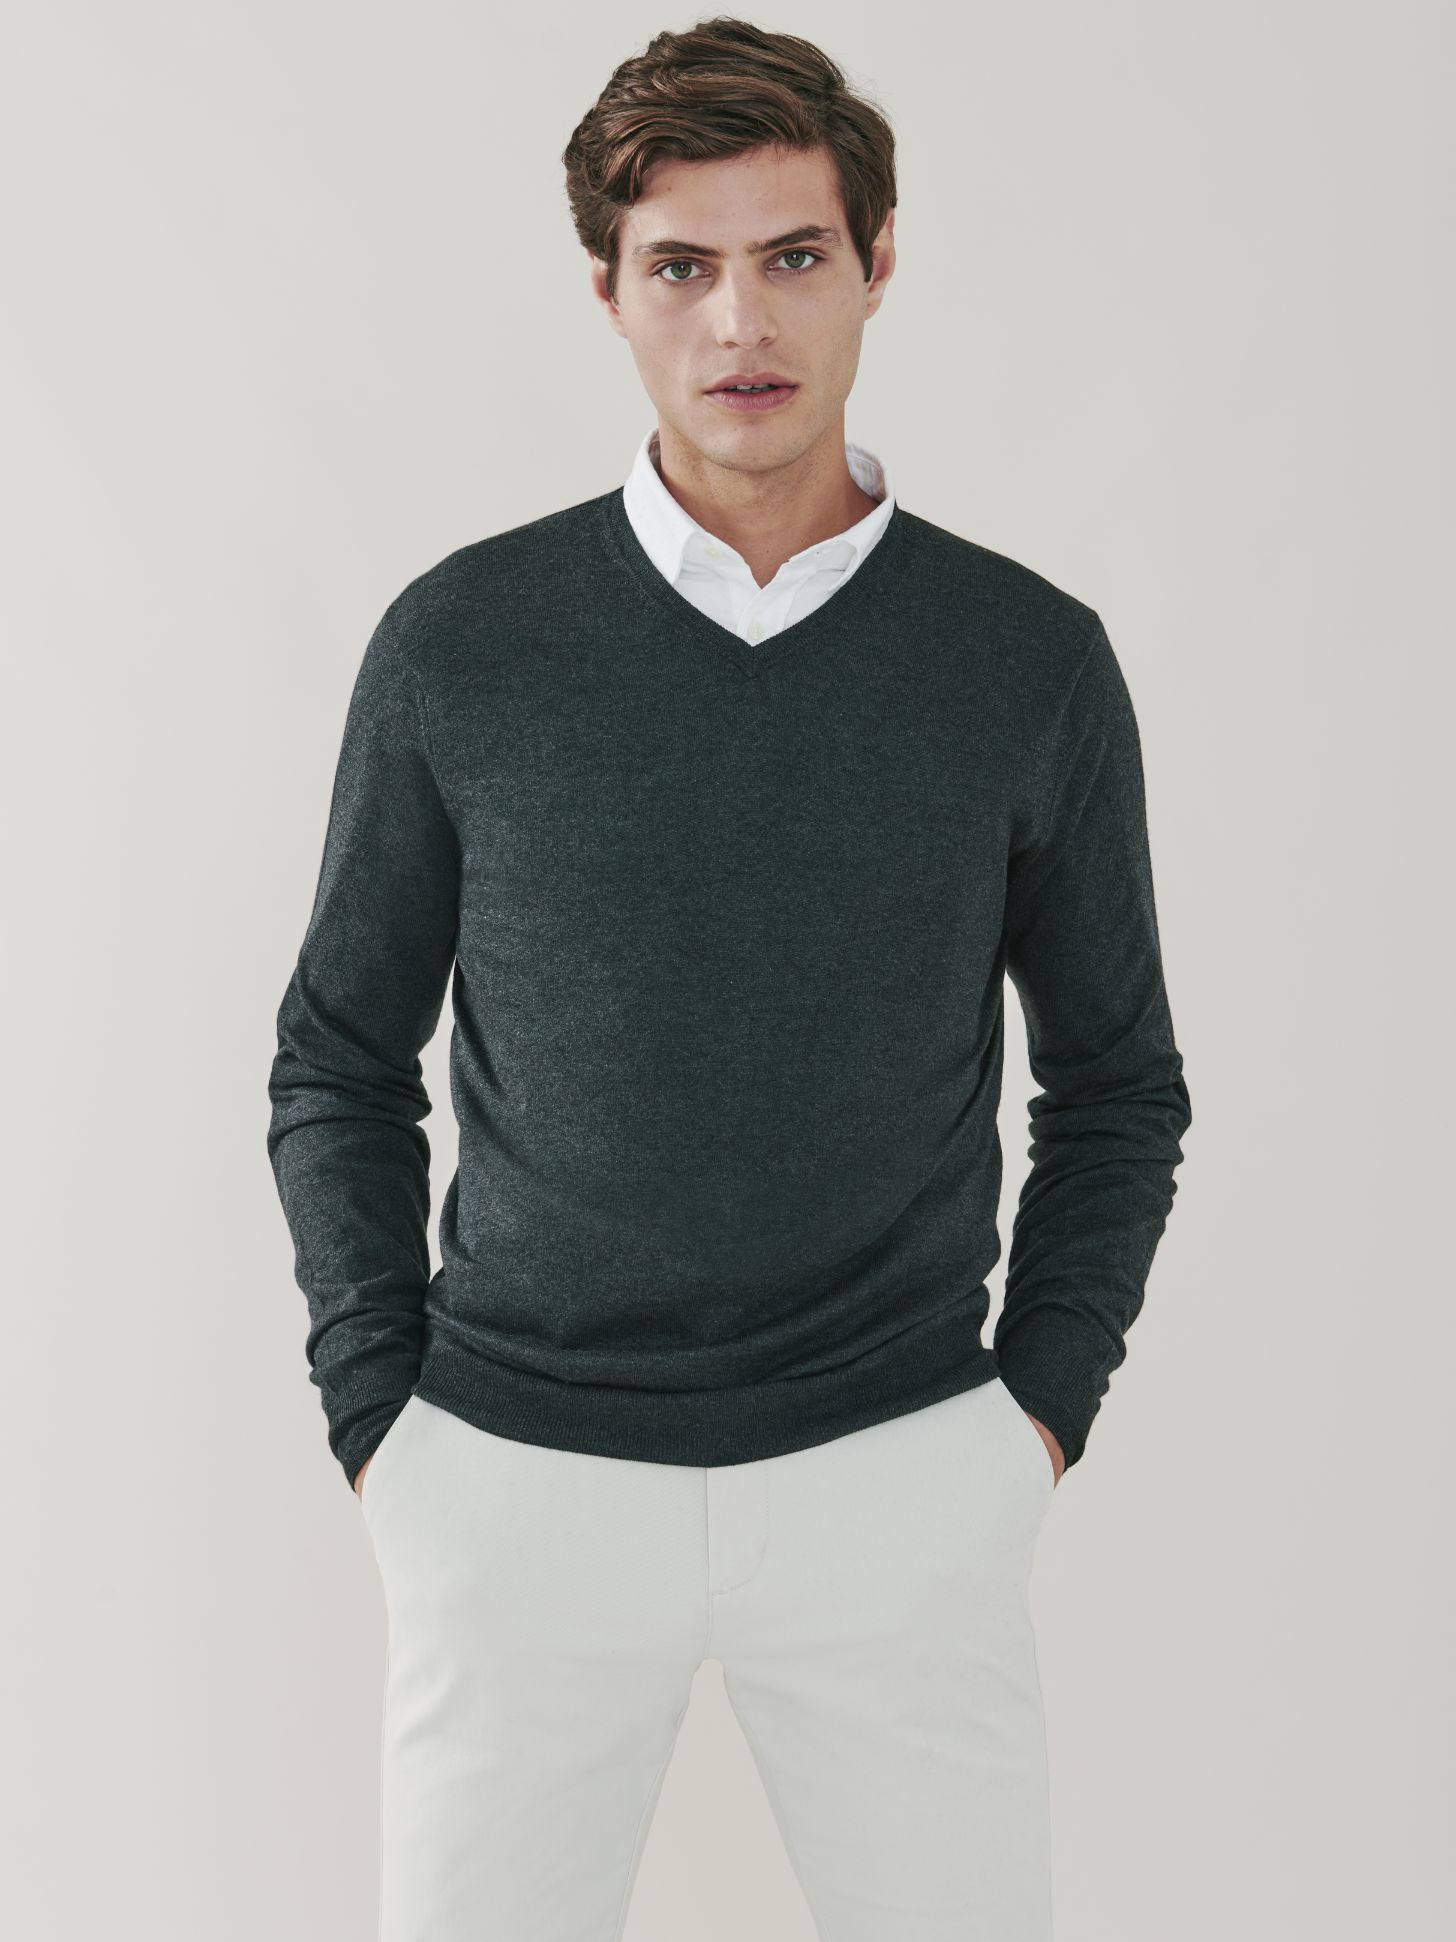 PITT | Men's Cashmere V Neck Sweater in Charcoal | MrQuintessential